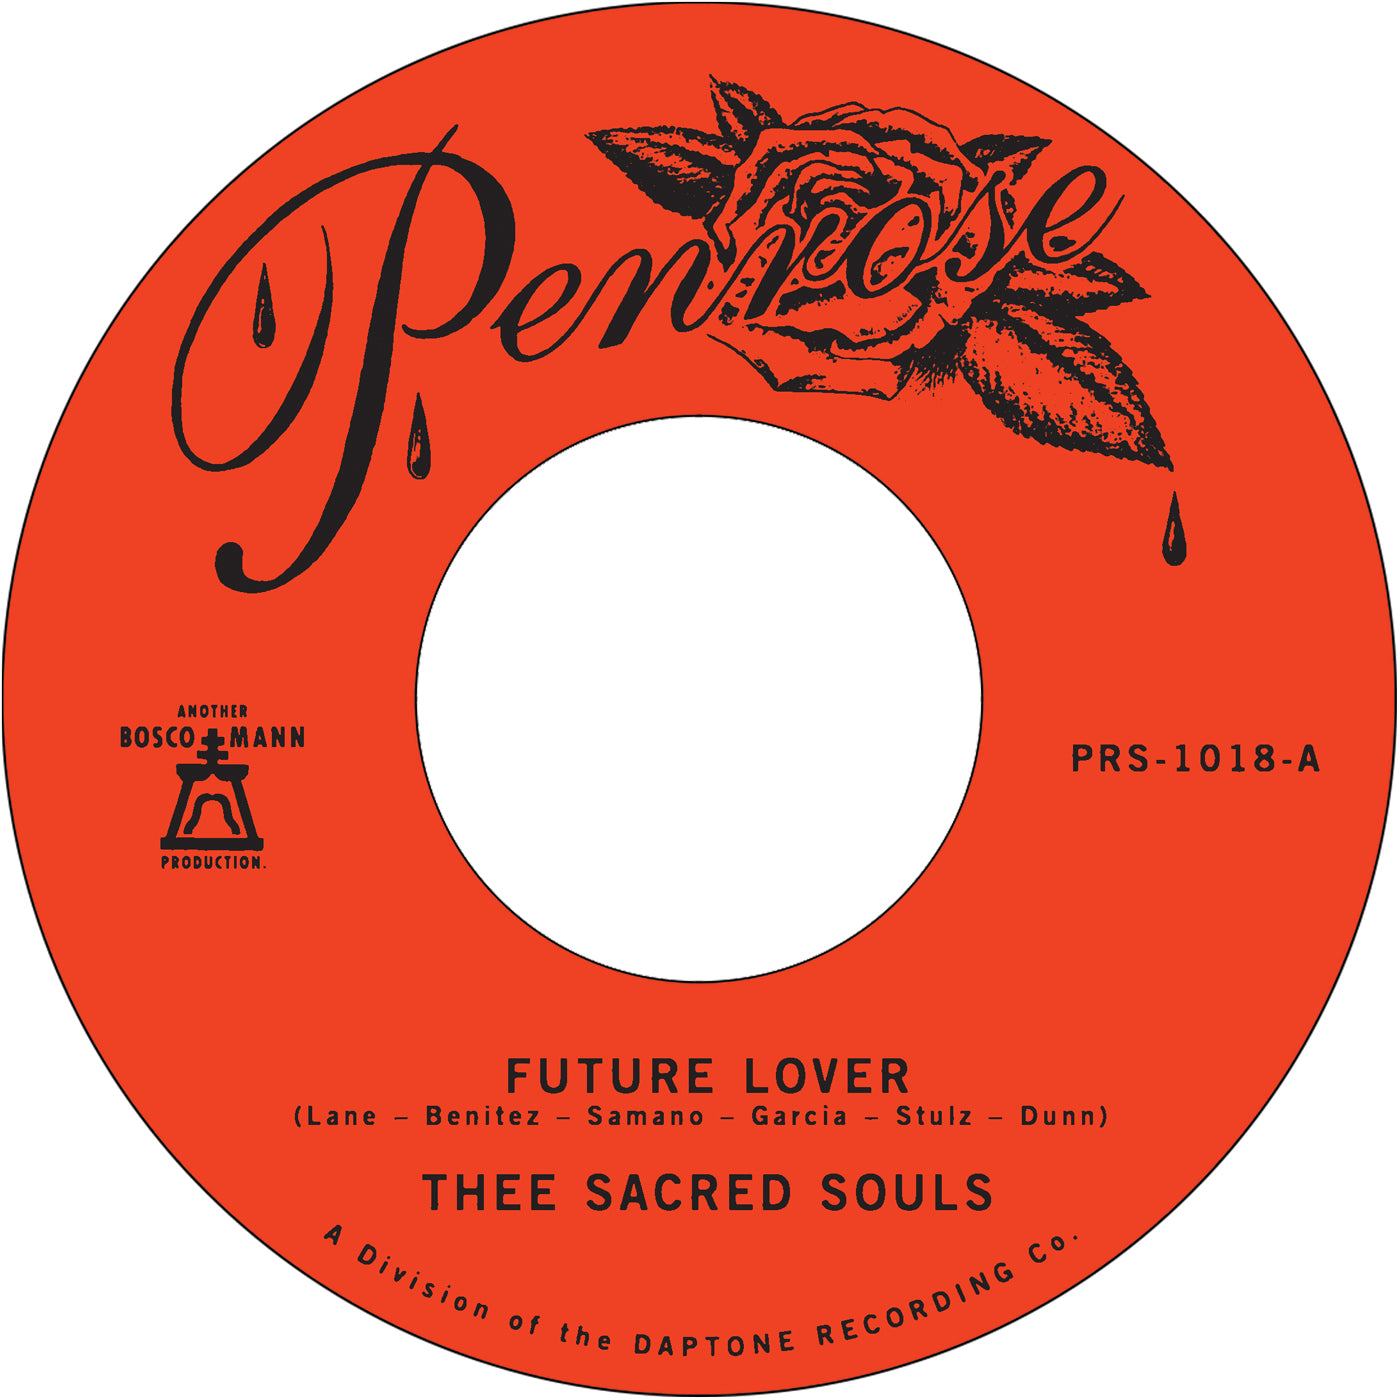 Thee Sacred Souls "Future Lover" 45